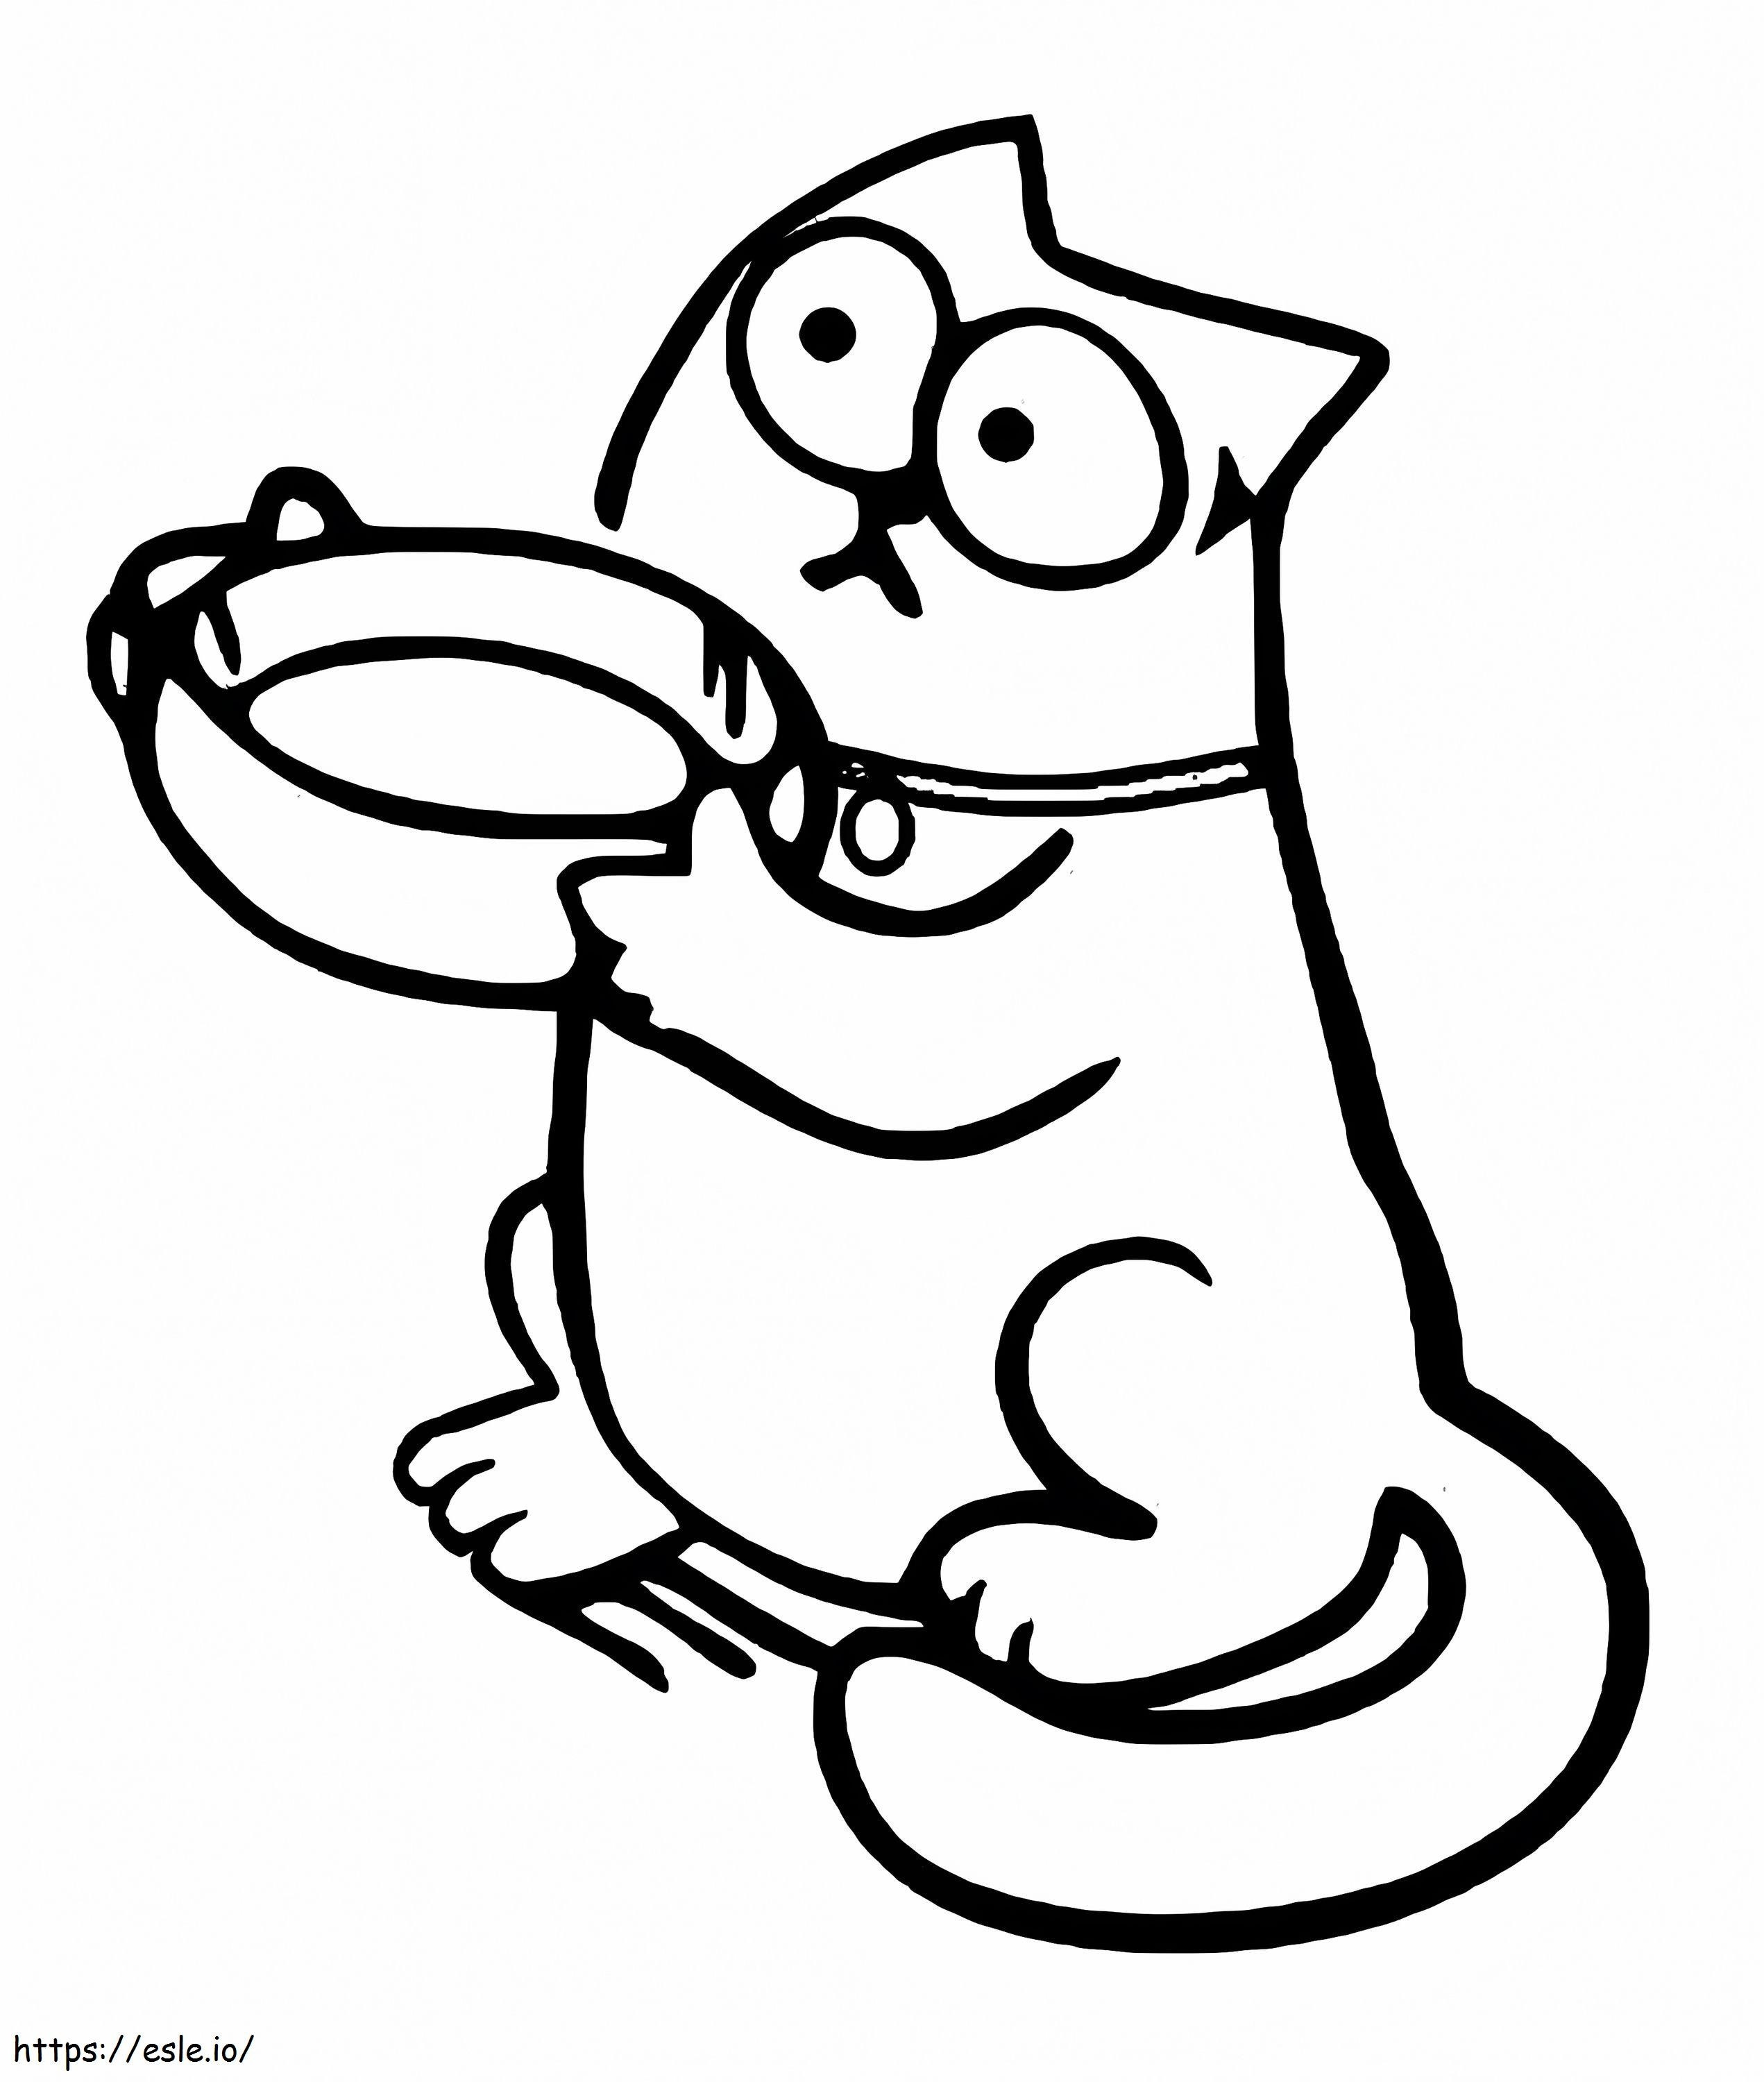 Simons Cat Begging For Food coloring page